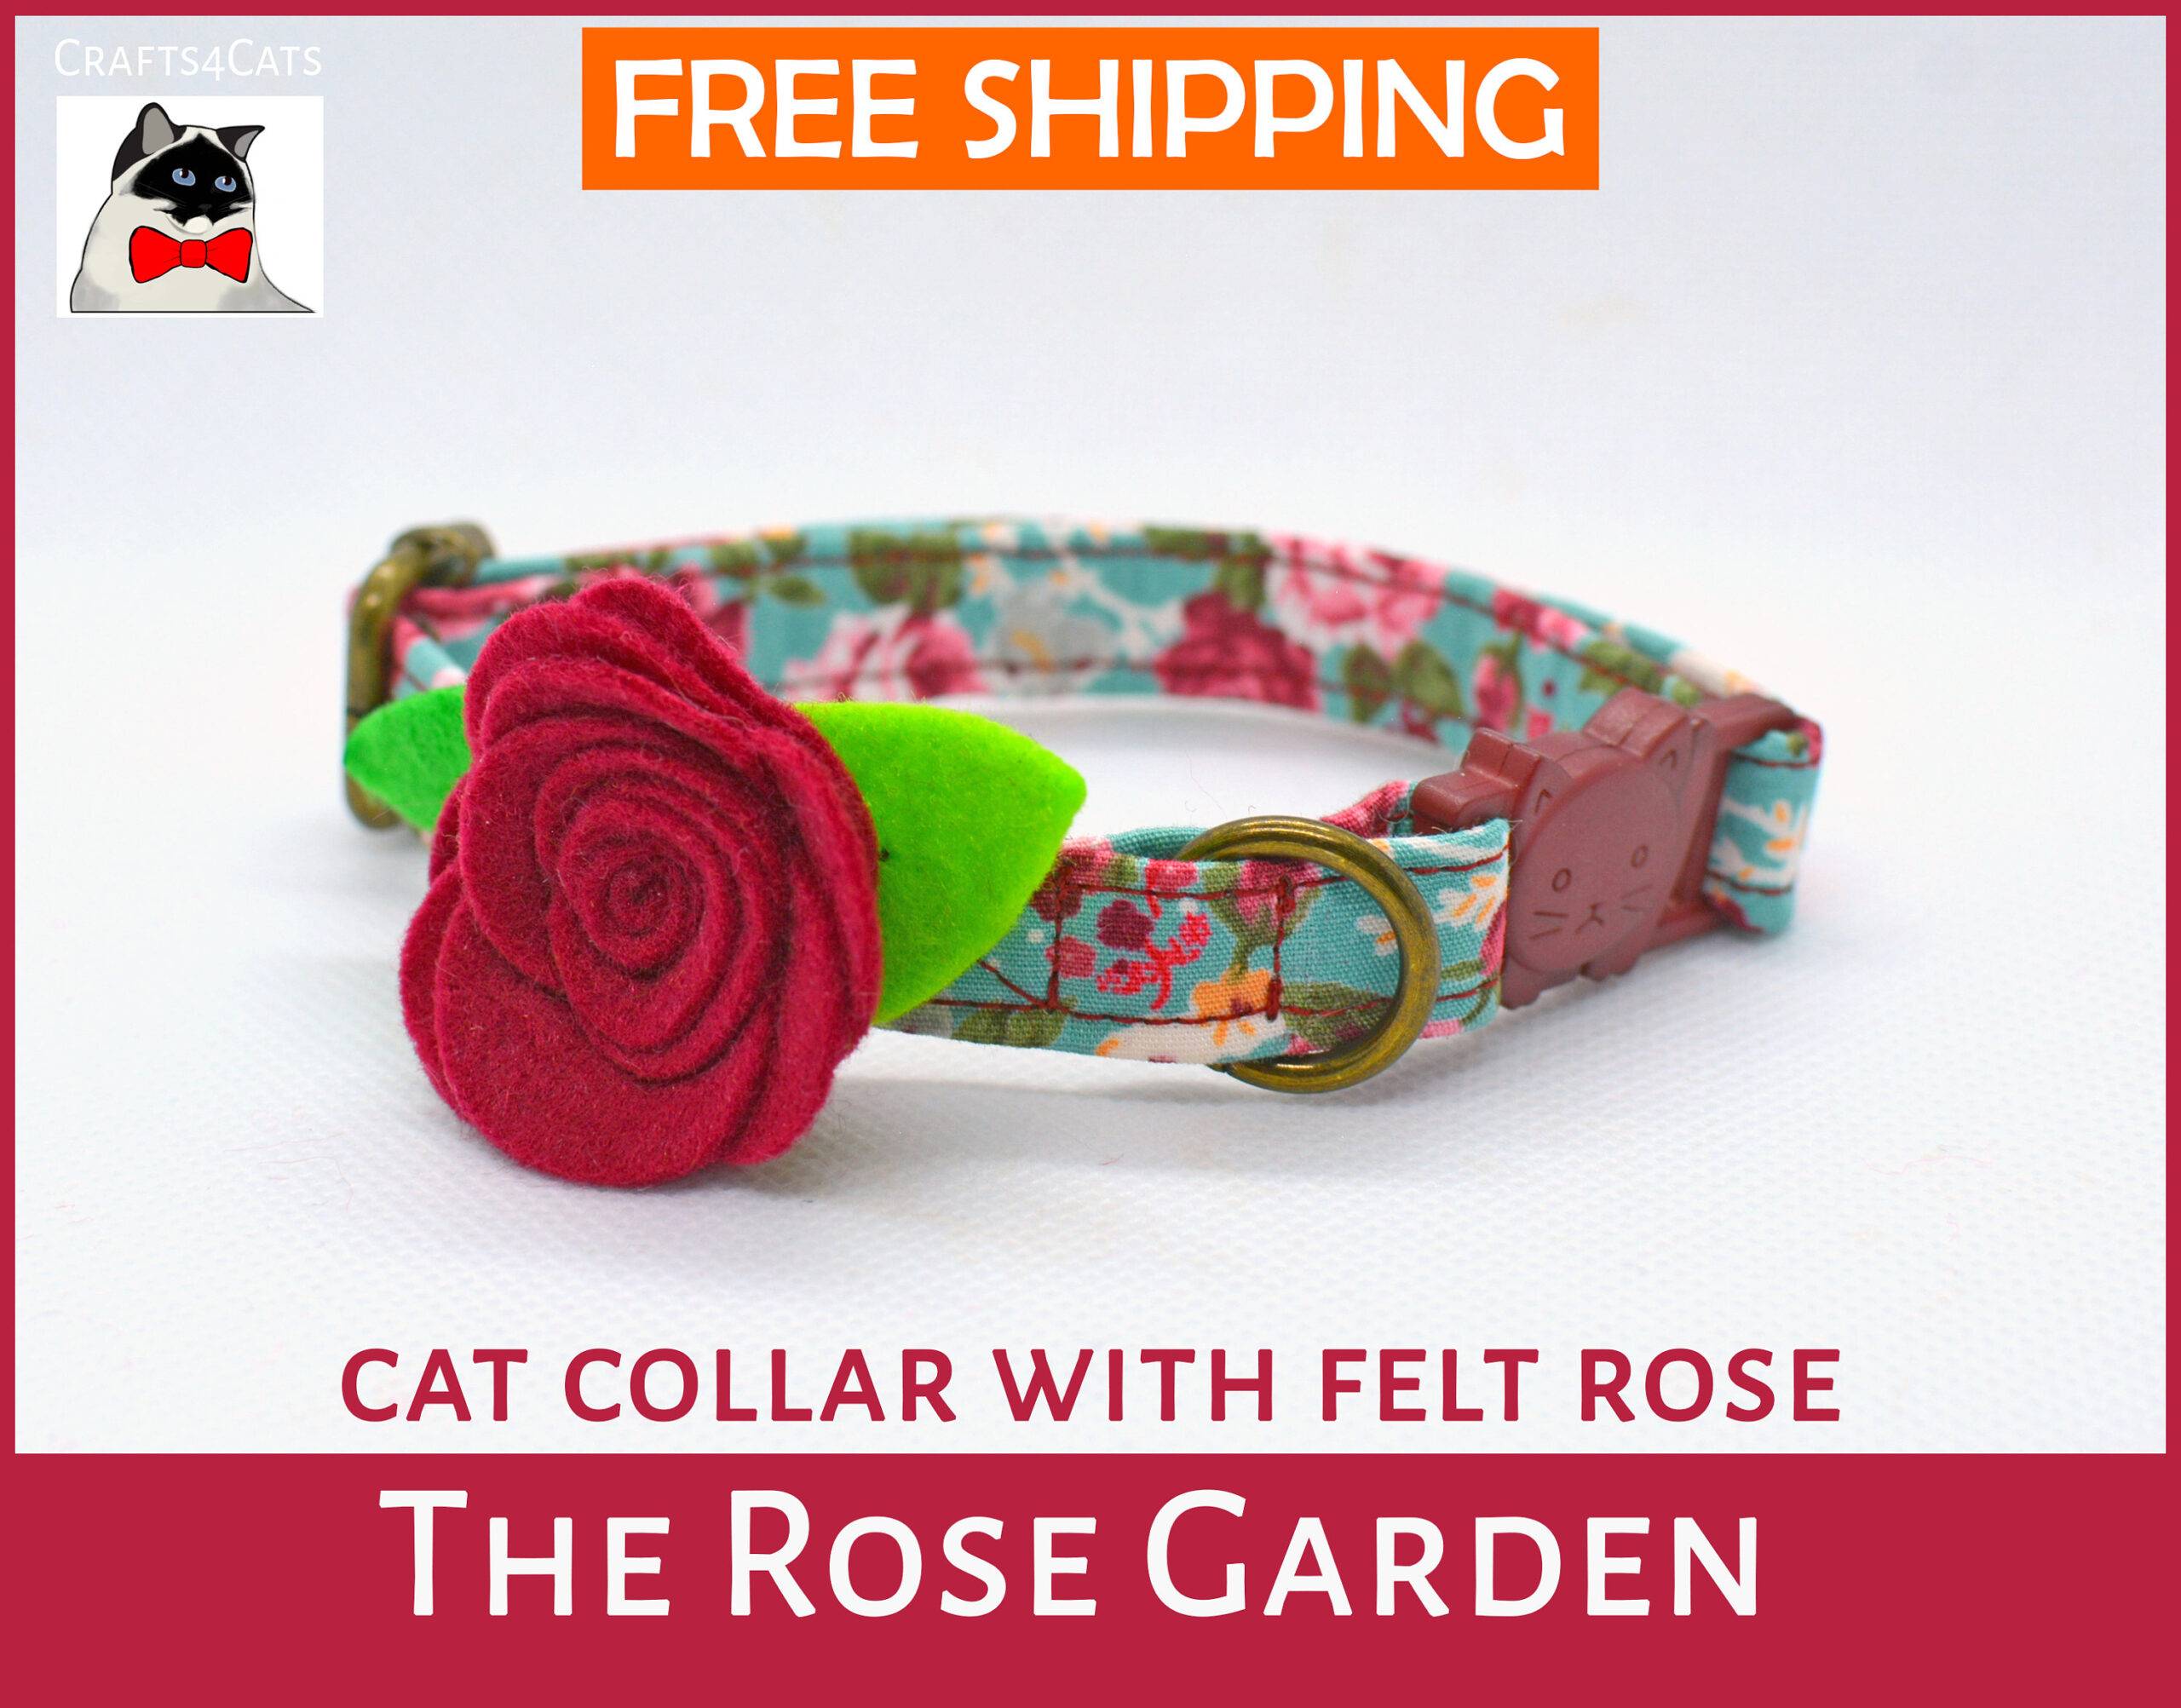 Rose cat collar with flower + bell & breakway buckle safe for adult cats, kittens and small dogs / worldwide shipping Crafts4Cats